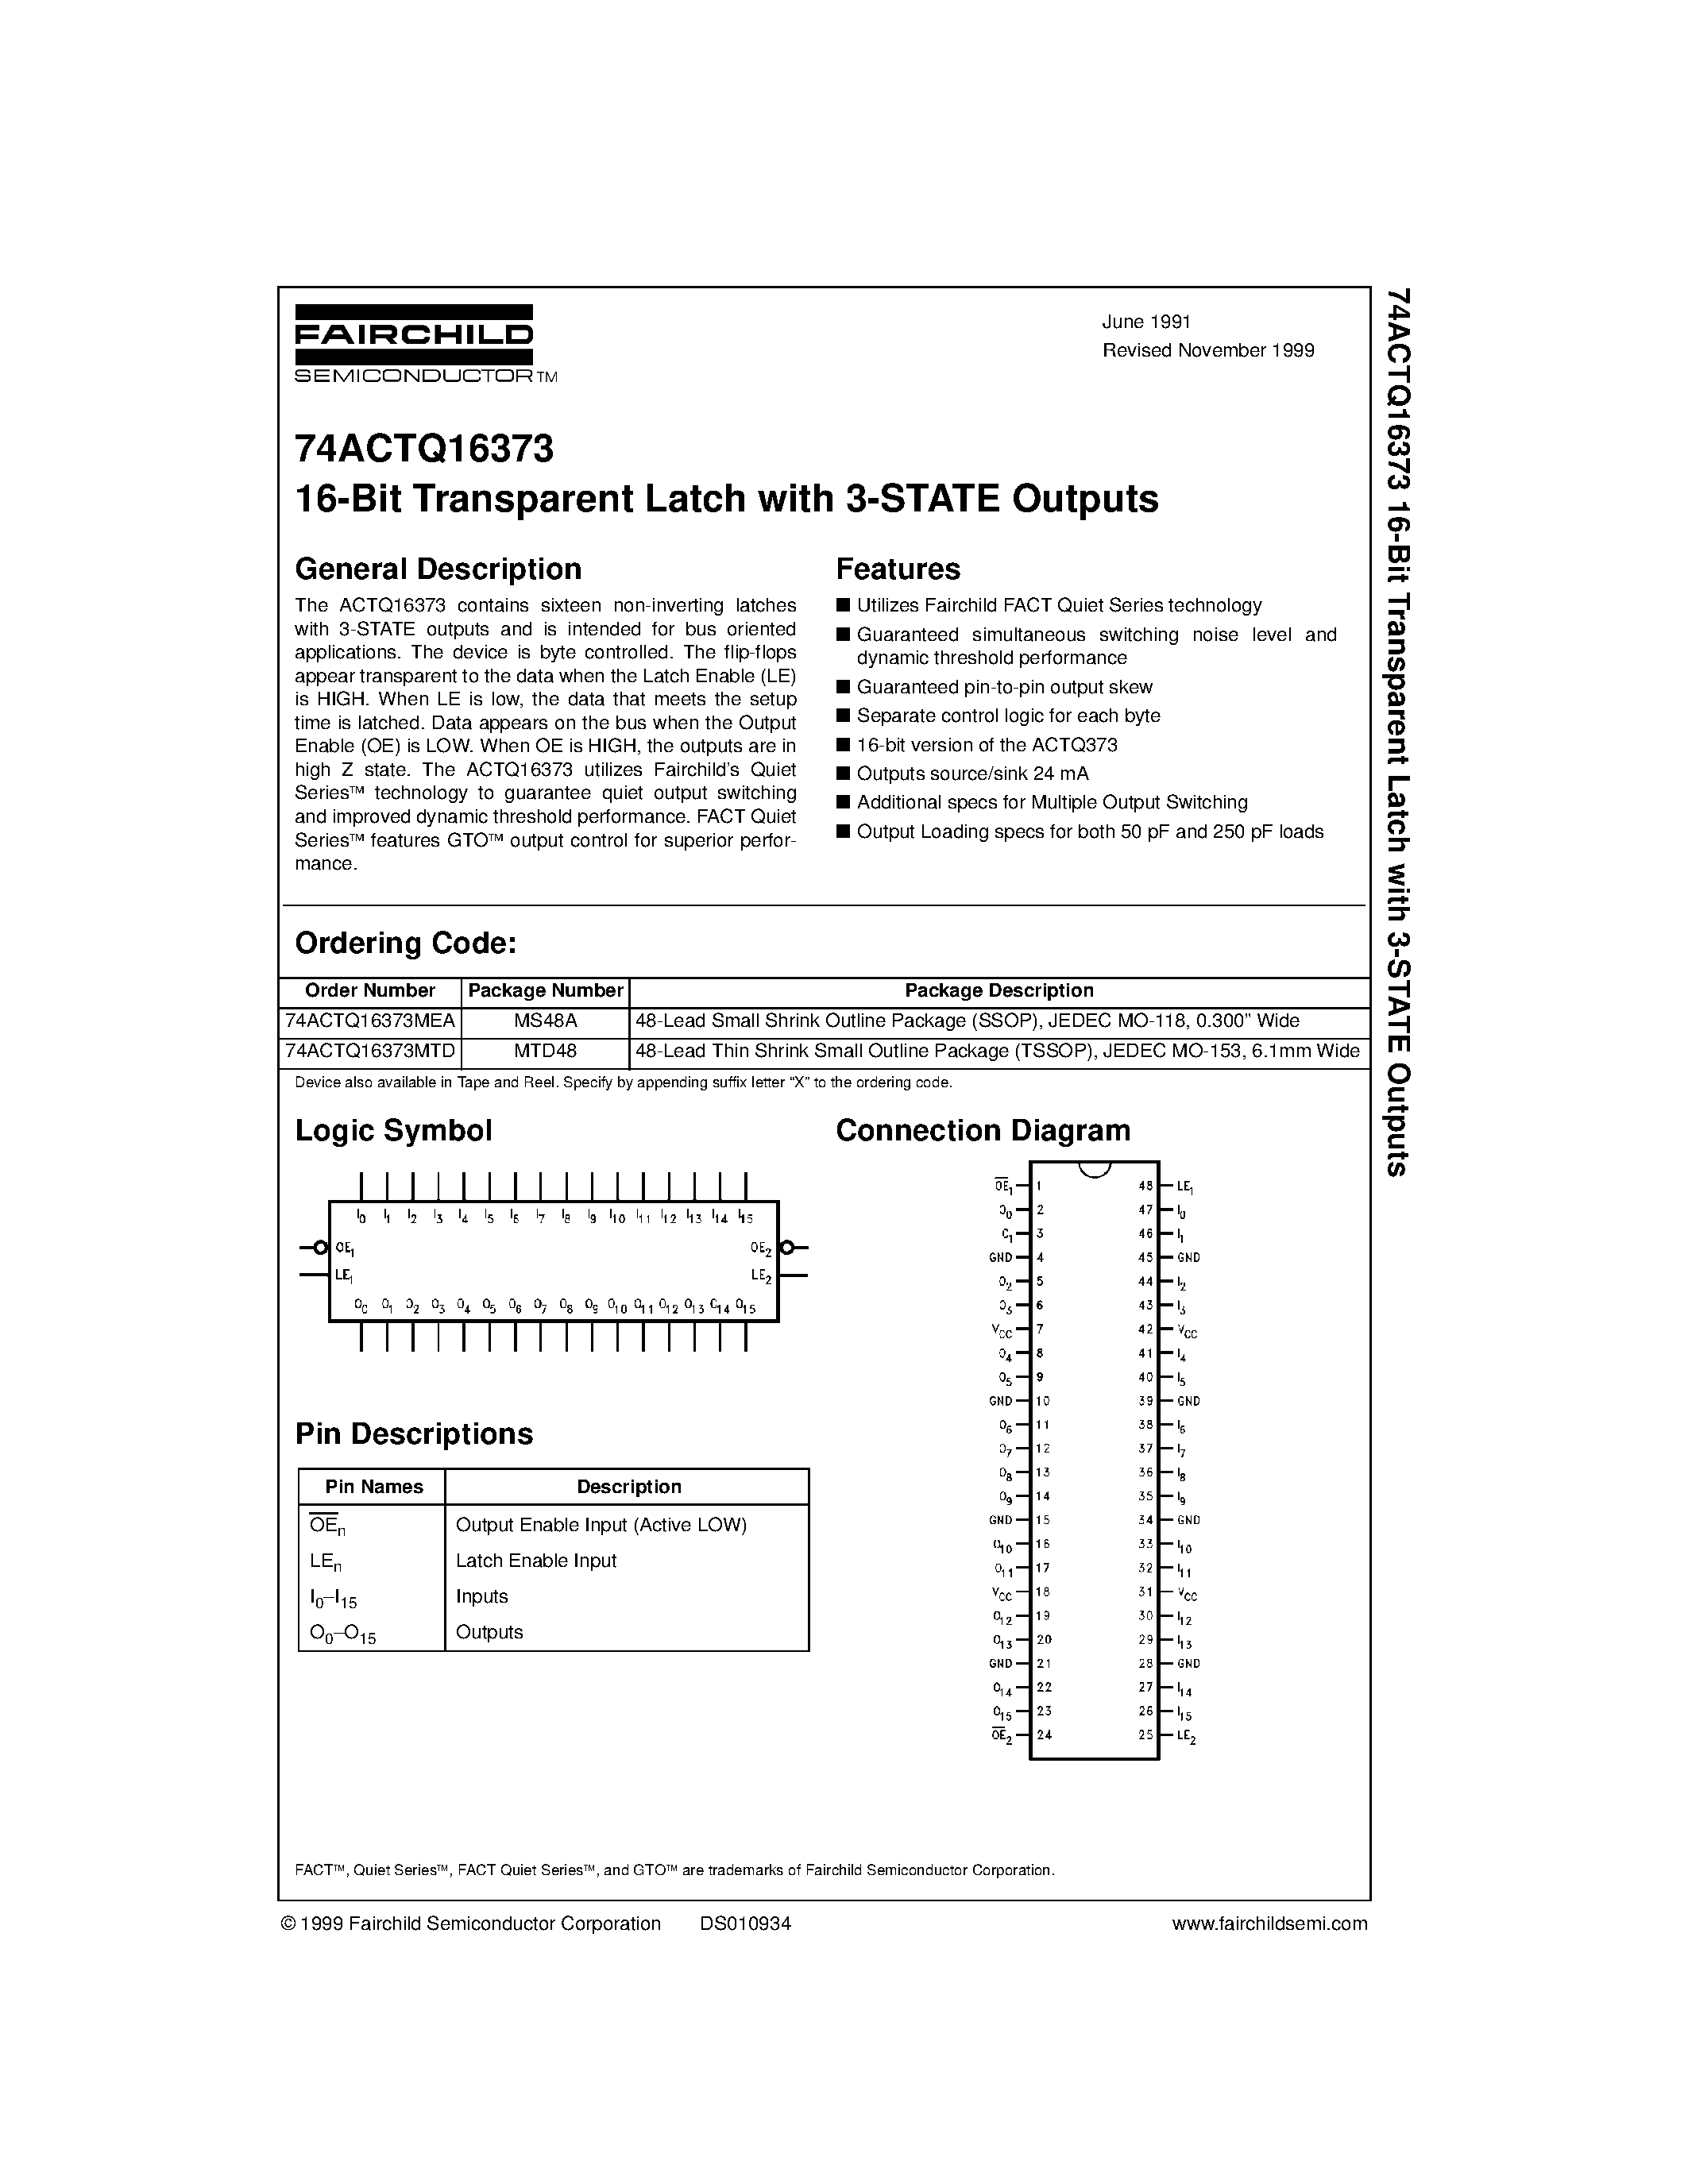 Datasheet 74ACTQ16373MTD - 16-Bit Transparent Latch with 3-STATE Outputs page 1